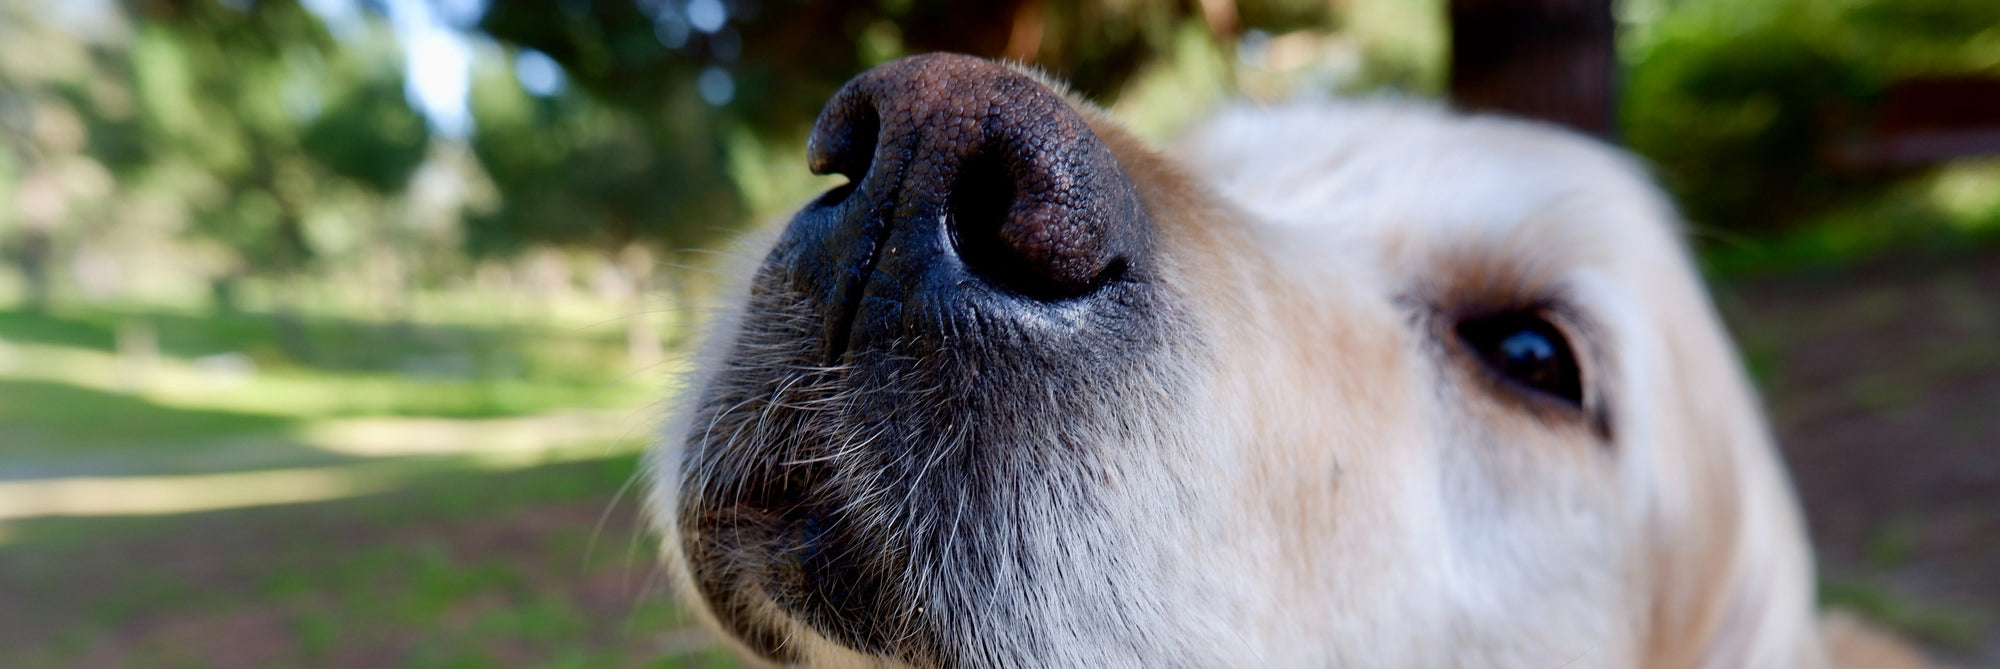 4 Tips To Keep Your Aging Dog Healthy & Happy